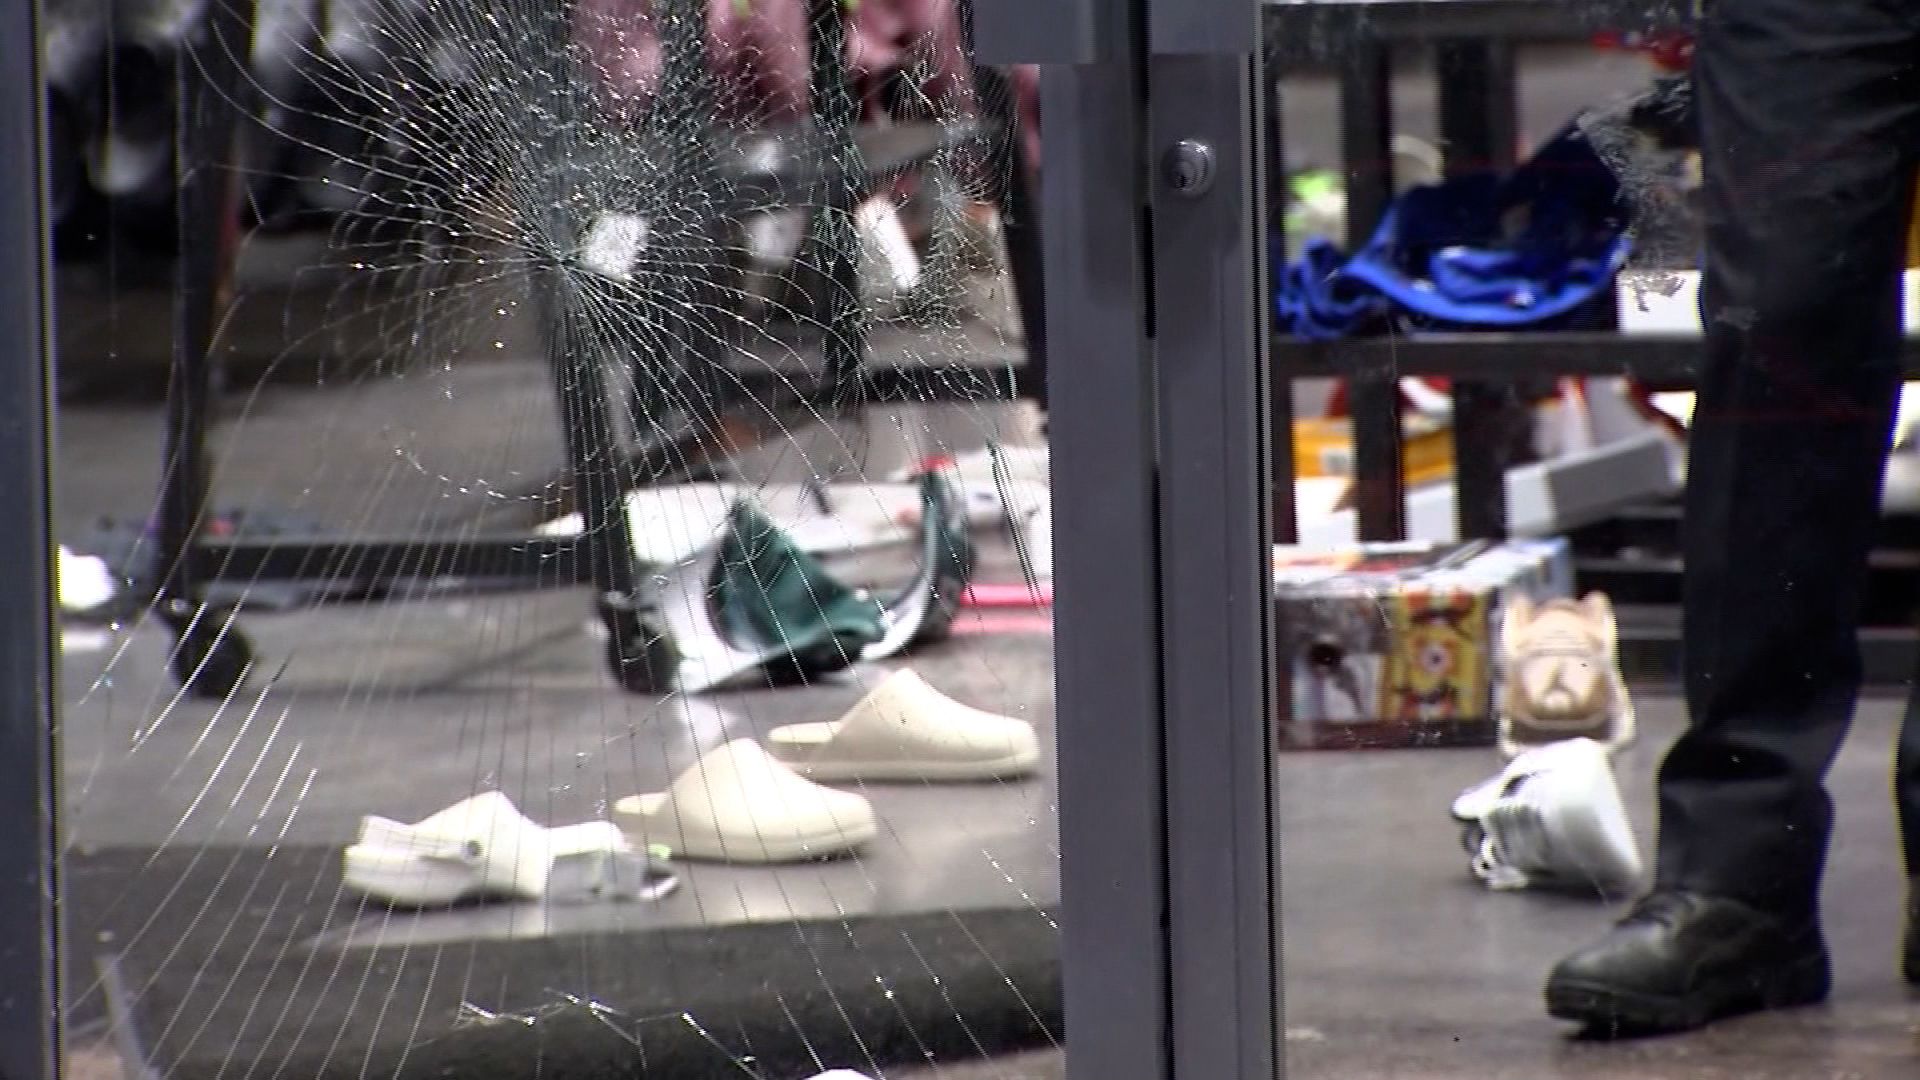 Several people started looting the Foot Locker near 14th street on